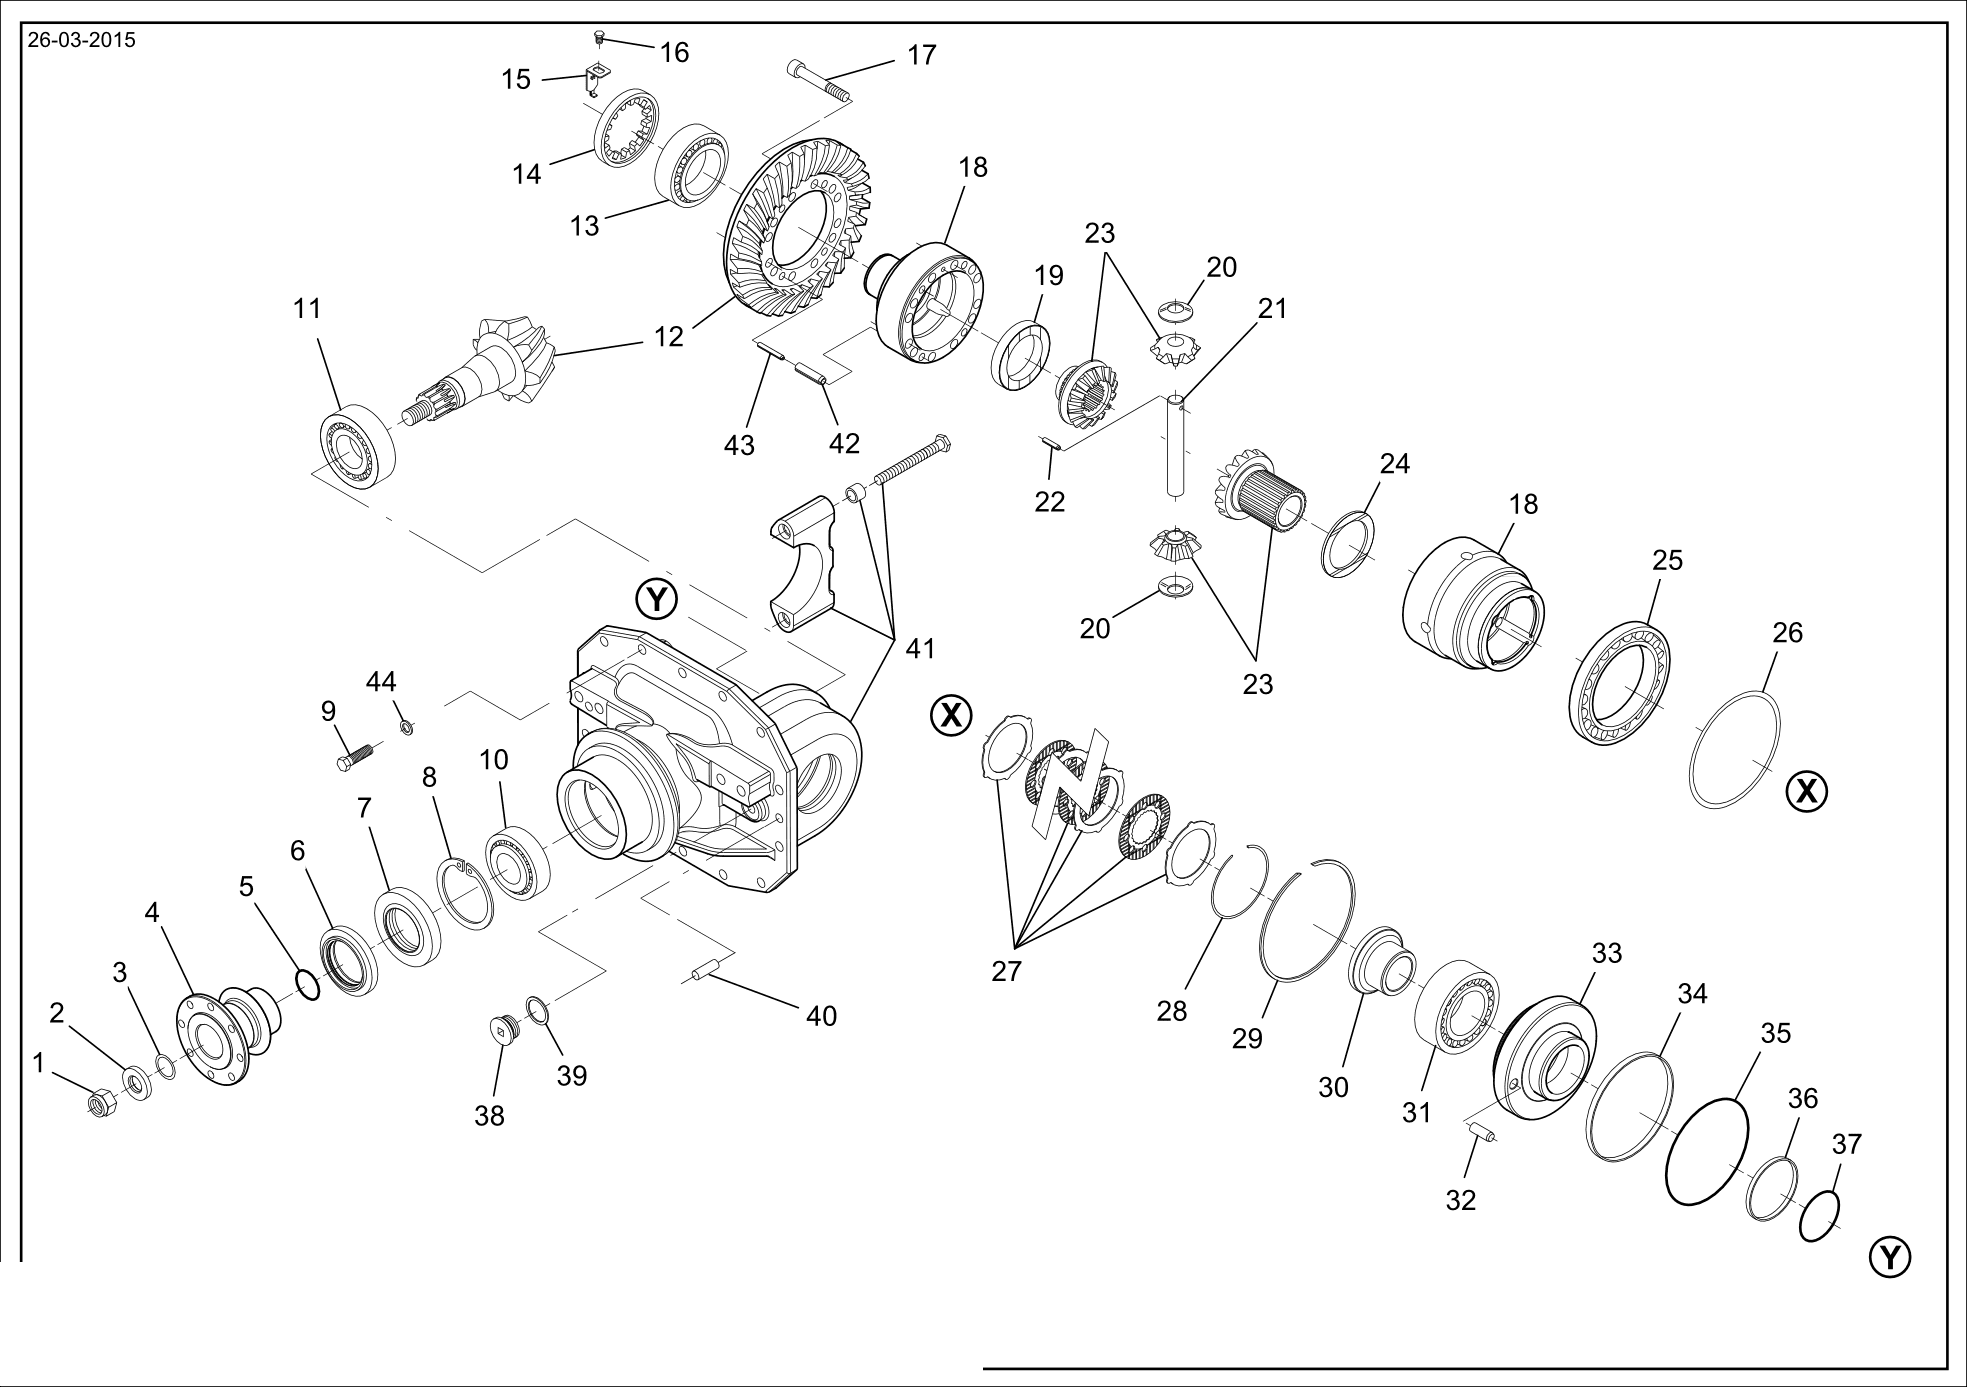 drawing for AGCO X533323900000 - CIRCLIP (figure 3)